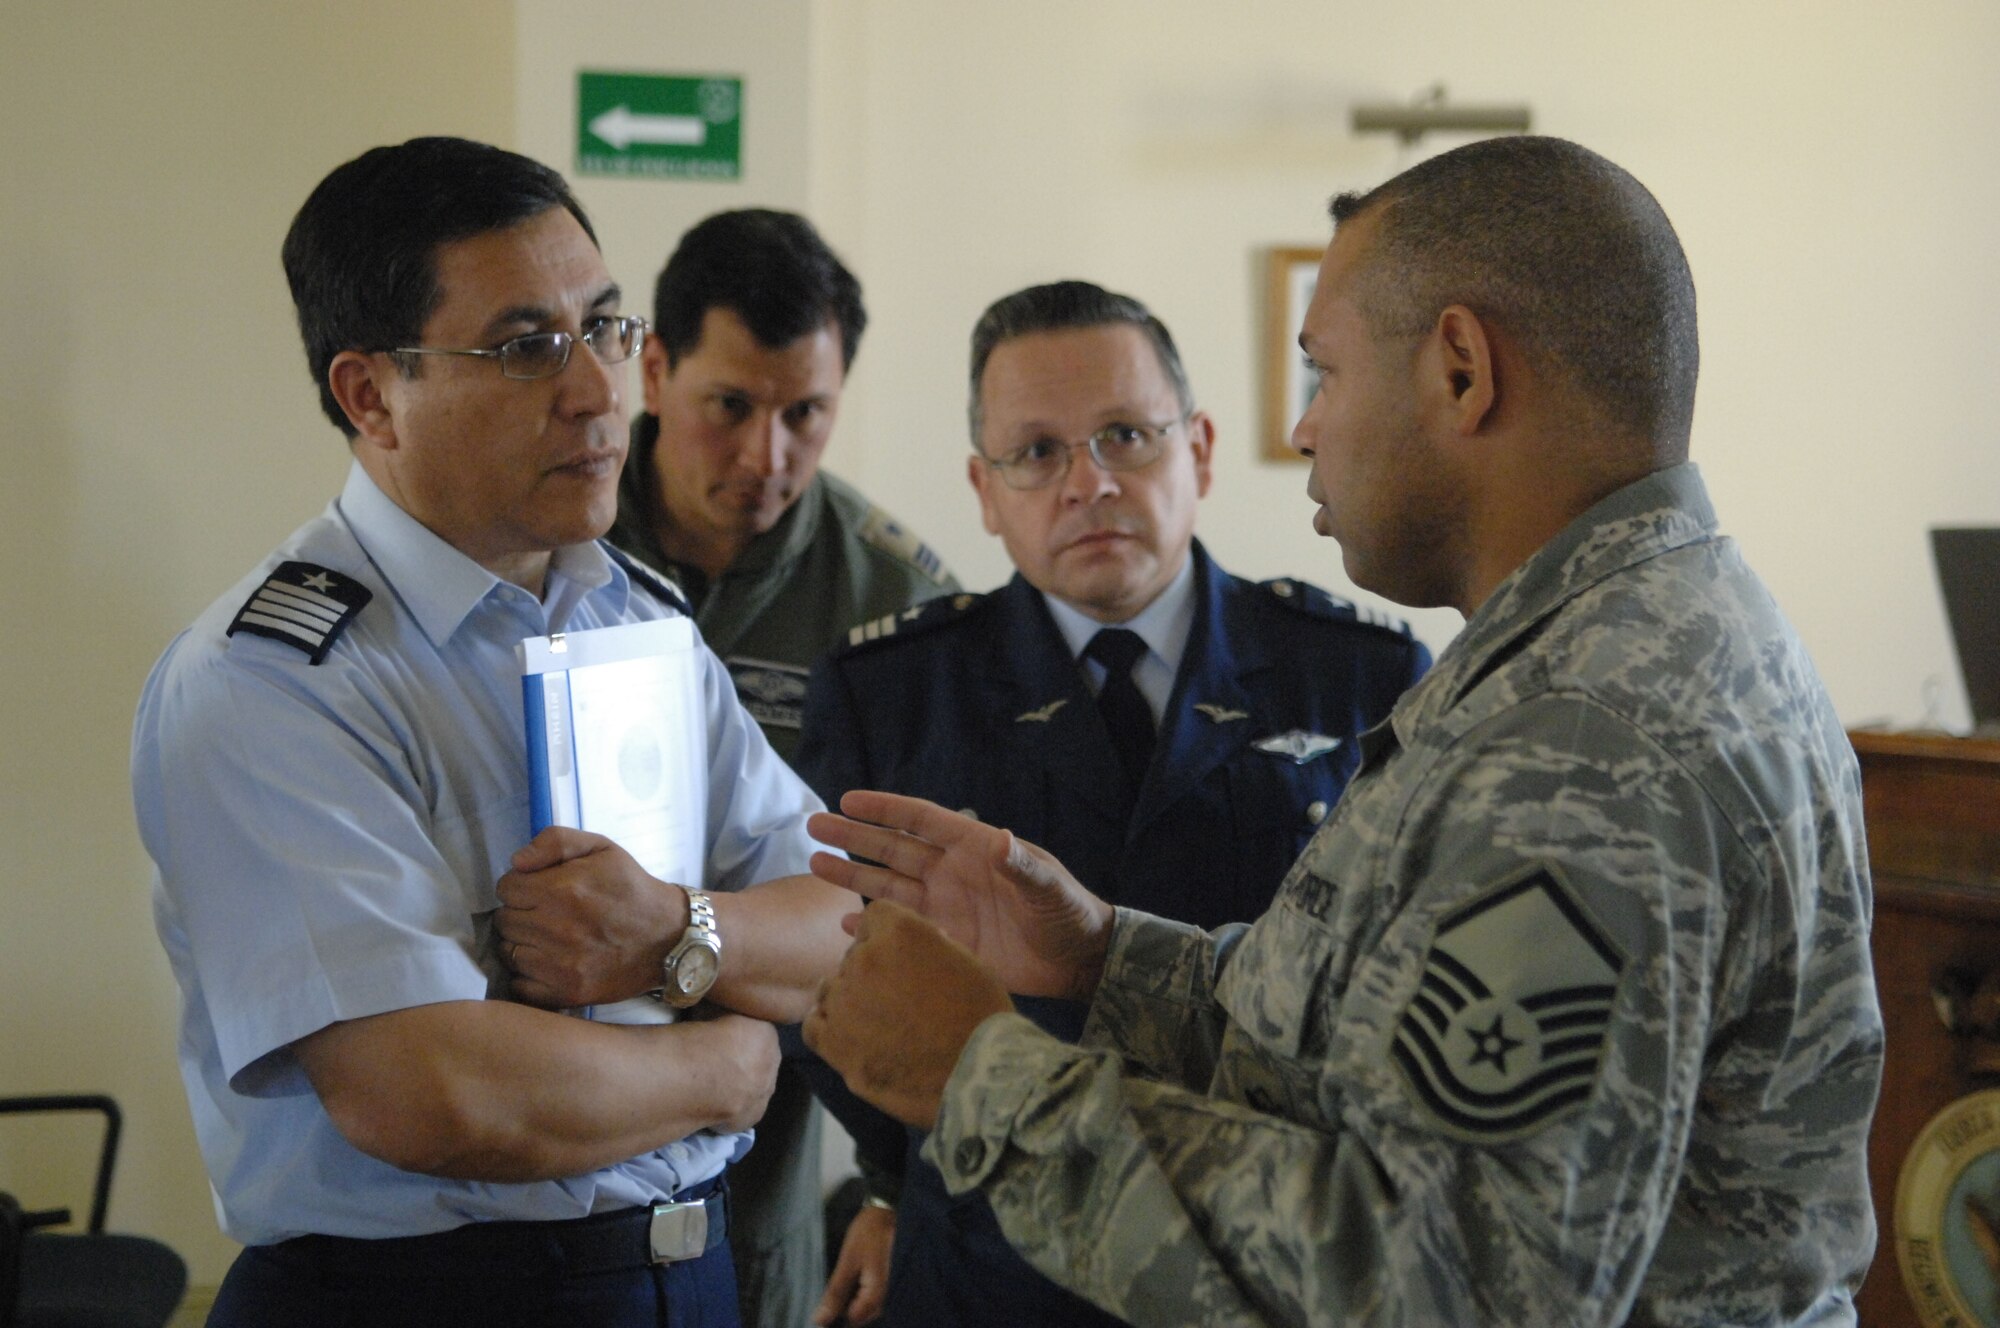 Master Sgt. Edward Nin, a force protection noncommissioned officer from 12th Air Force at Davis Monthan Air Force Base, Ariz., discusses highlights of an Oct. 29 Operation Southern Partner subject matter exchange with the Chilean air base chief of security forces Col. Randot Espinoza, while the group Commandant, Col. Anselmo Salas (center) looks on. Operation Southern Partner is an in-depth, two-week subject matter exchange emphasizing partnership, cooperation and sharing of information with partner nation Air Forces in Latin America. (U.S. Air Force Photo/Tech. Sgt. Roy Santana)